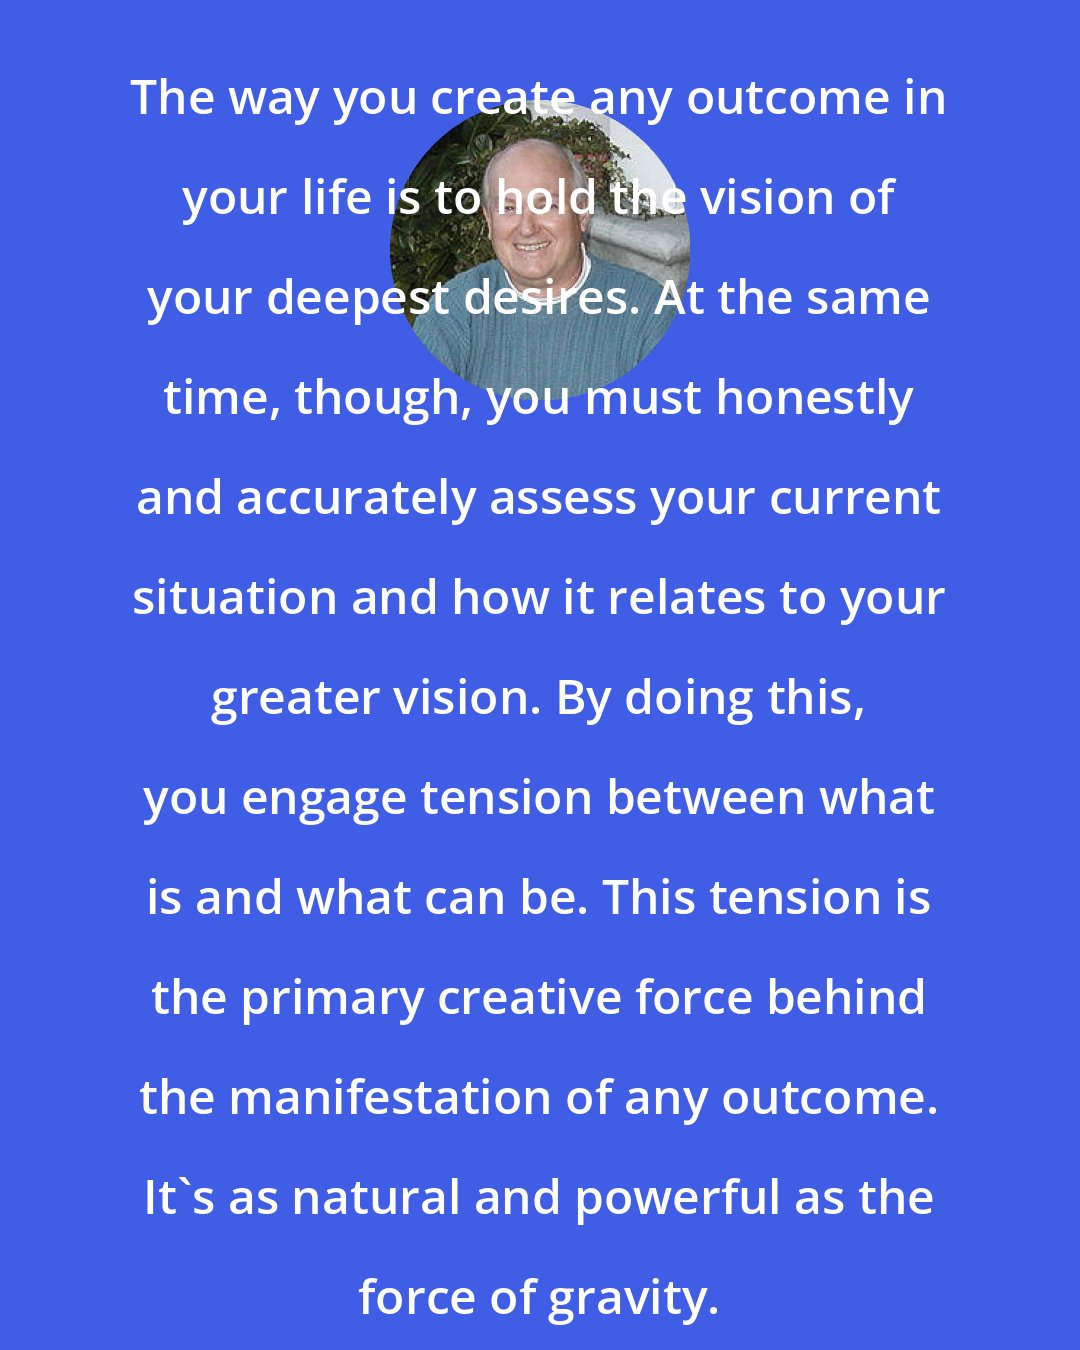 David Emerald Womeldorff: The way you create any outcome in your life is to hold the vision of your deepest desires. At the same time, though, you must honestly and accurately assess your current situation and how it relates to your greater vision. By doing this, you engage tension between what is and what can be. This tension is the primary creative force behind the manifestation of any outcome. It's as natural and powerful as the force of gravity.